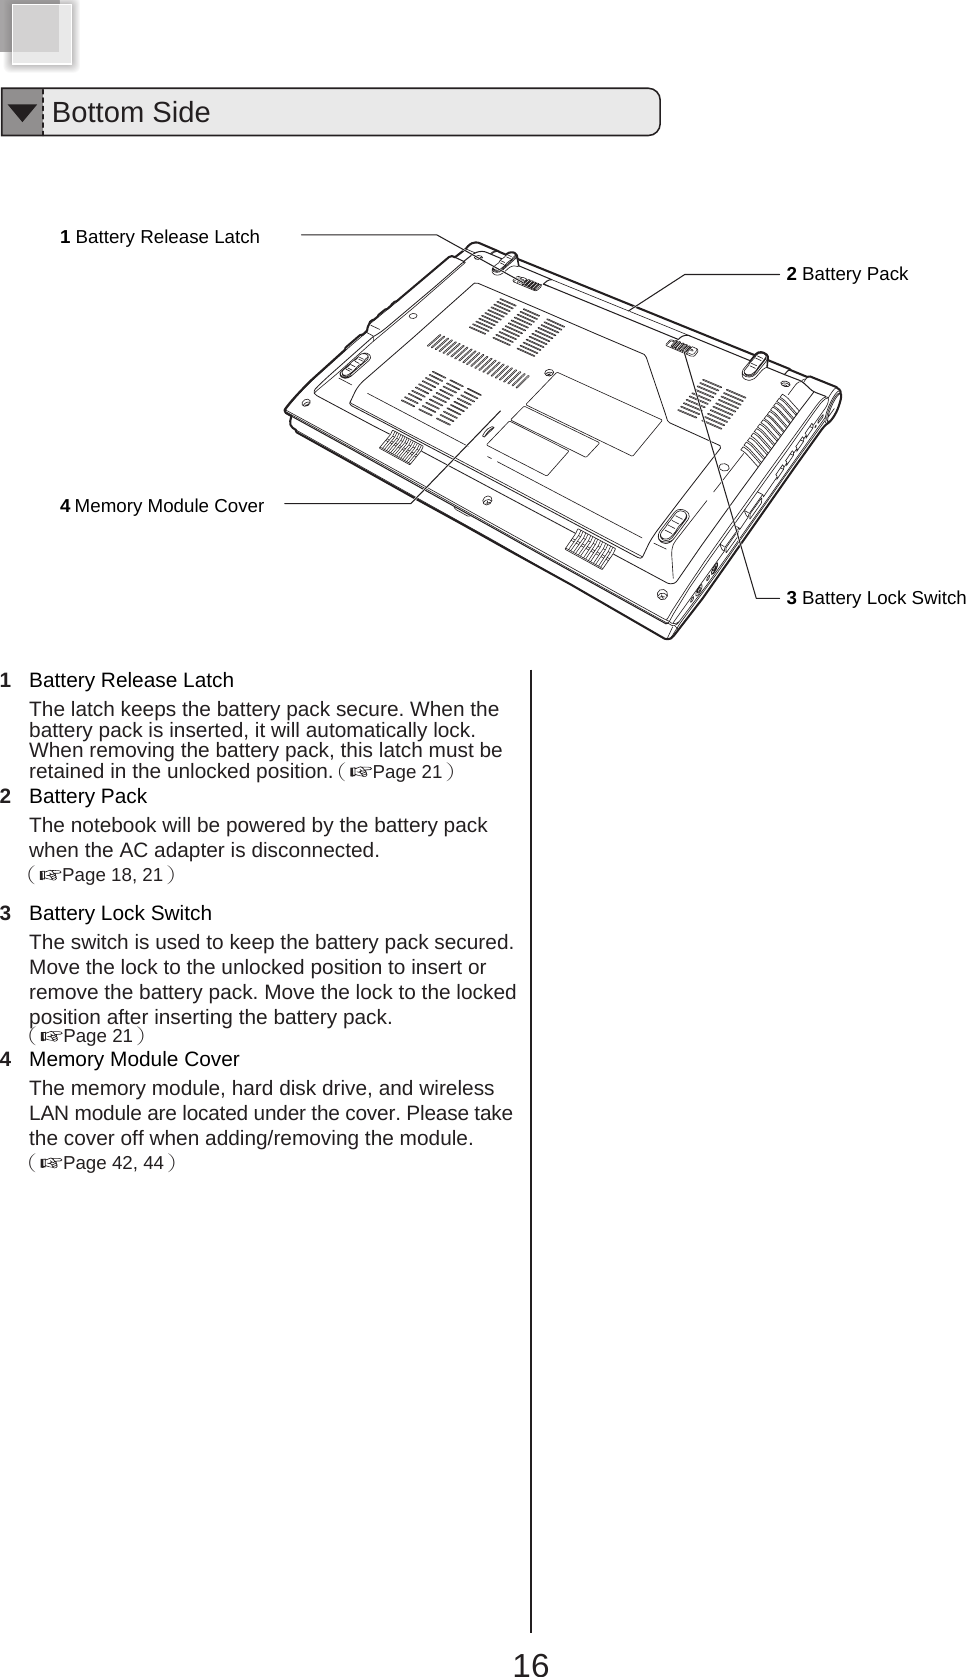 1 Battery Release Latch 4  Memory Module Cover3 Battery Lock Switch2 Battery PackBottom Side1Battery Release LatchThe latch keeps the battery pack secure. When thebattery pack is inserted, it will automatically lock.When removing the battery pack, this latch must beretained in the unlocked position.（Page 21）2Battery PackThe notebook will be powered by the battery packwhen the AC adapter is disconnected.（Page 18, 21）3Battery Lock SwitchThe switch is used to keep the battery pack secured.Move the lock to the unlocked position to insert orremove the battery pack. Move the lock to the lockedposition after inserting the battery pack.（Page 21）4Memory Module CoverThe memory module, hard disk drive, and wirelessLAN module are located under the cover. Please takethe cover off when adding/removing the module.（Page 42, 44）16